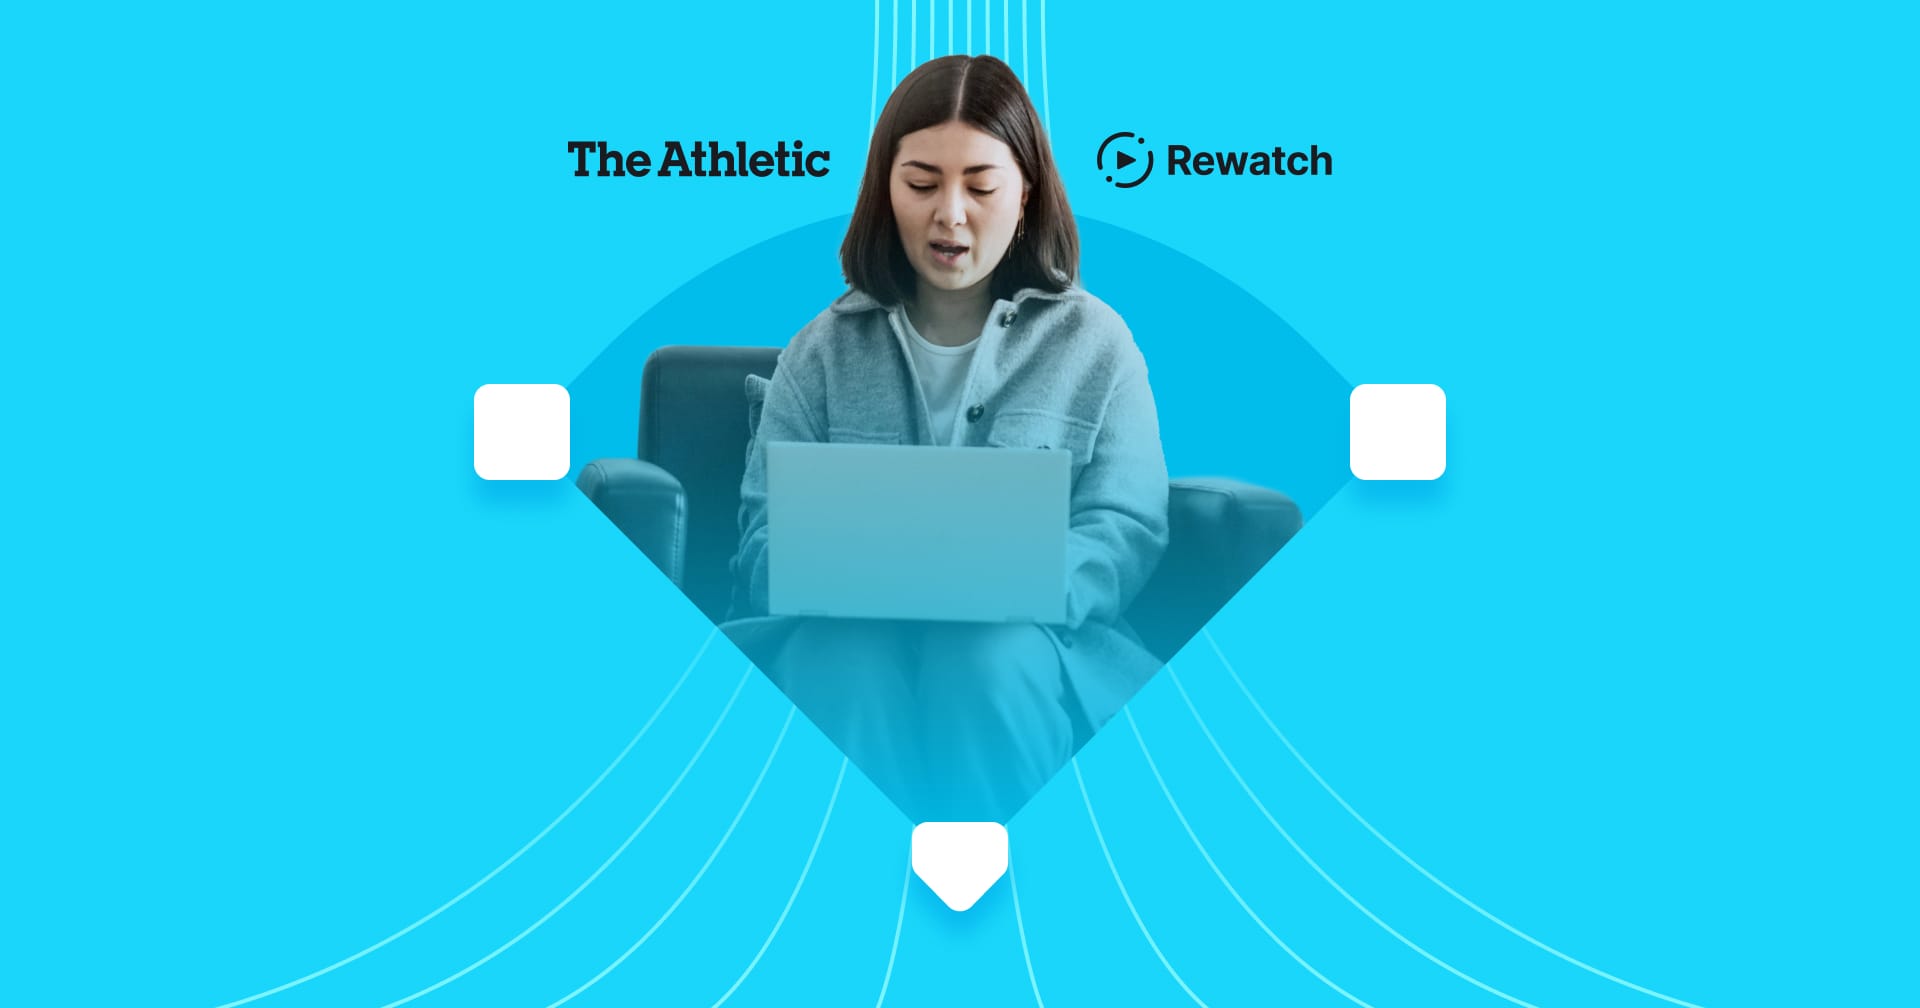 A woman working on a computer with a baseball diamond shape behind her on a teal background